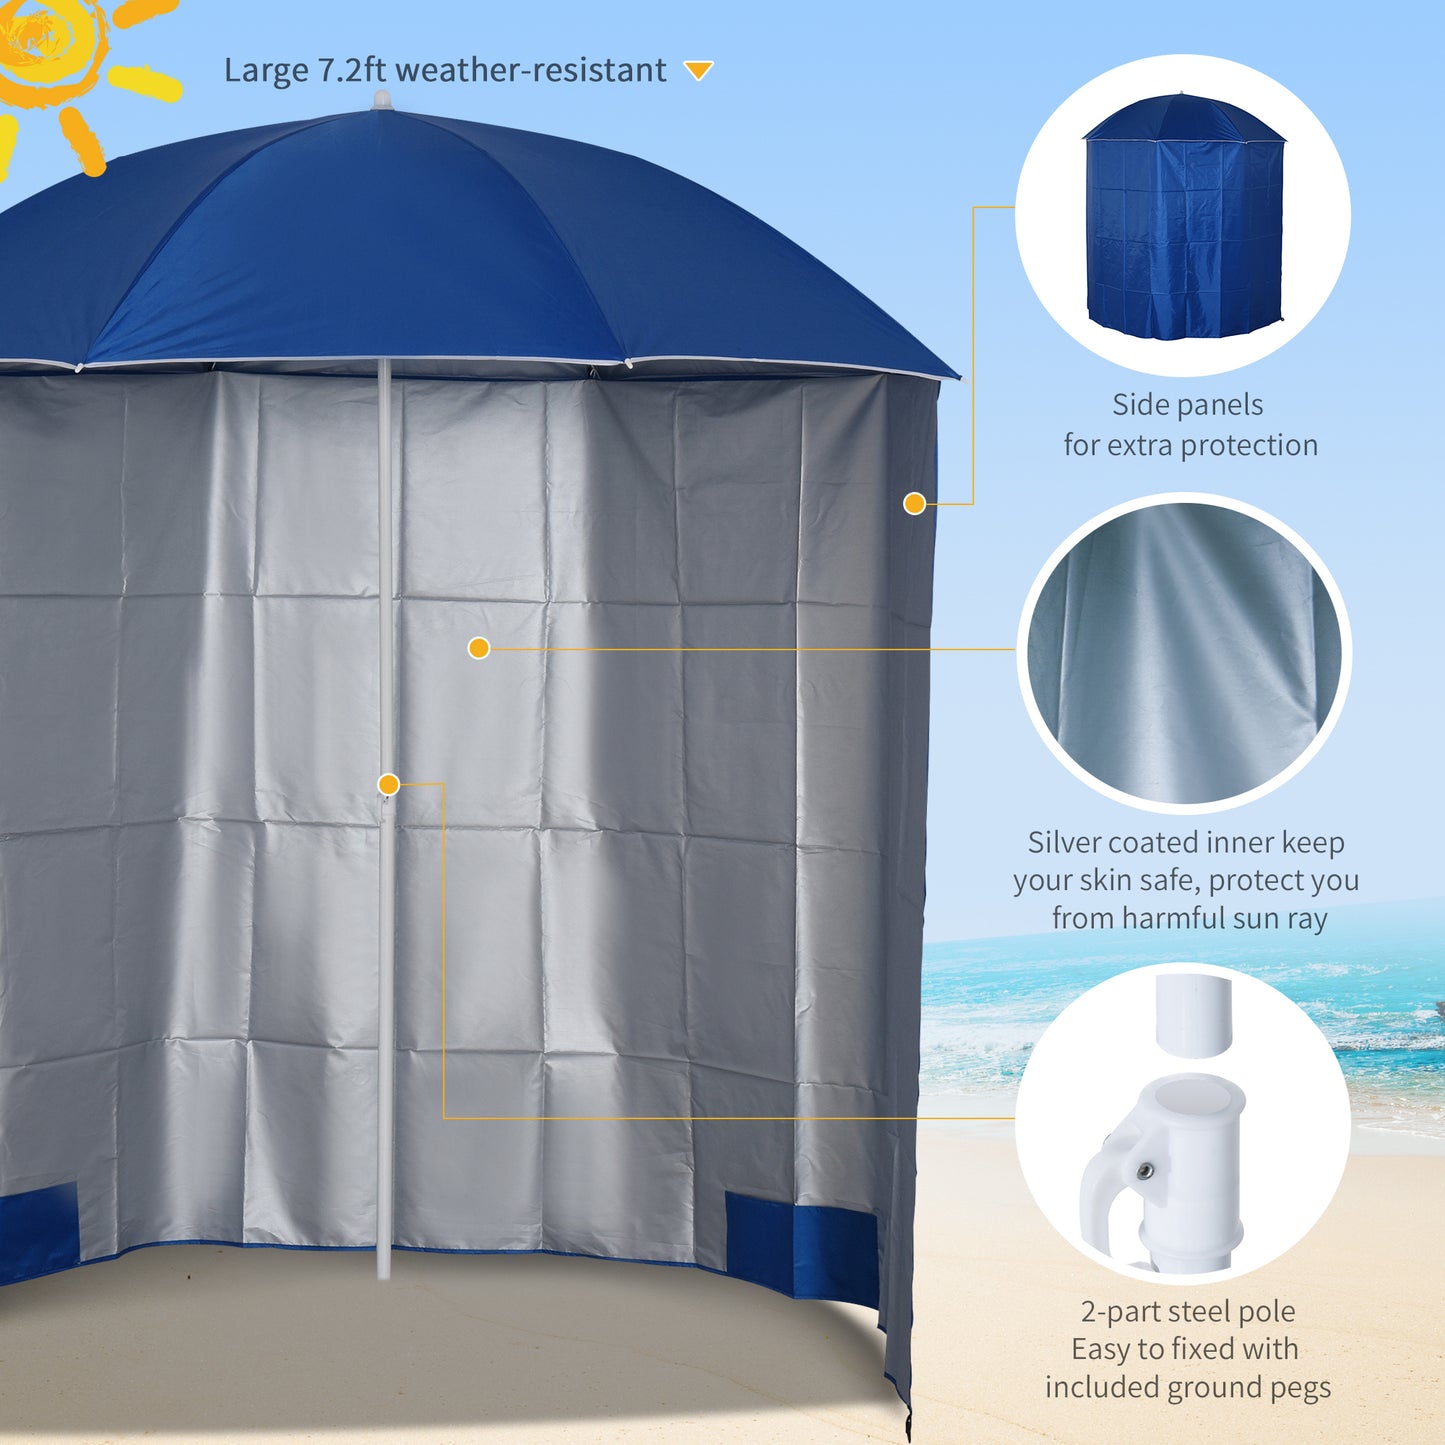 Outsunny Beach Brolly Shelter: 88" Arc Fishing Umbrella with Side Canopy, Carry Bag Included, Azure Blue